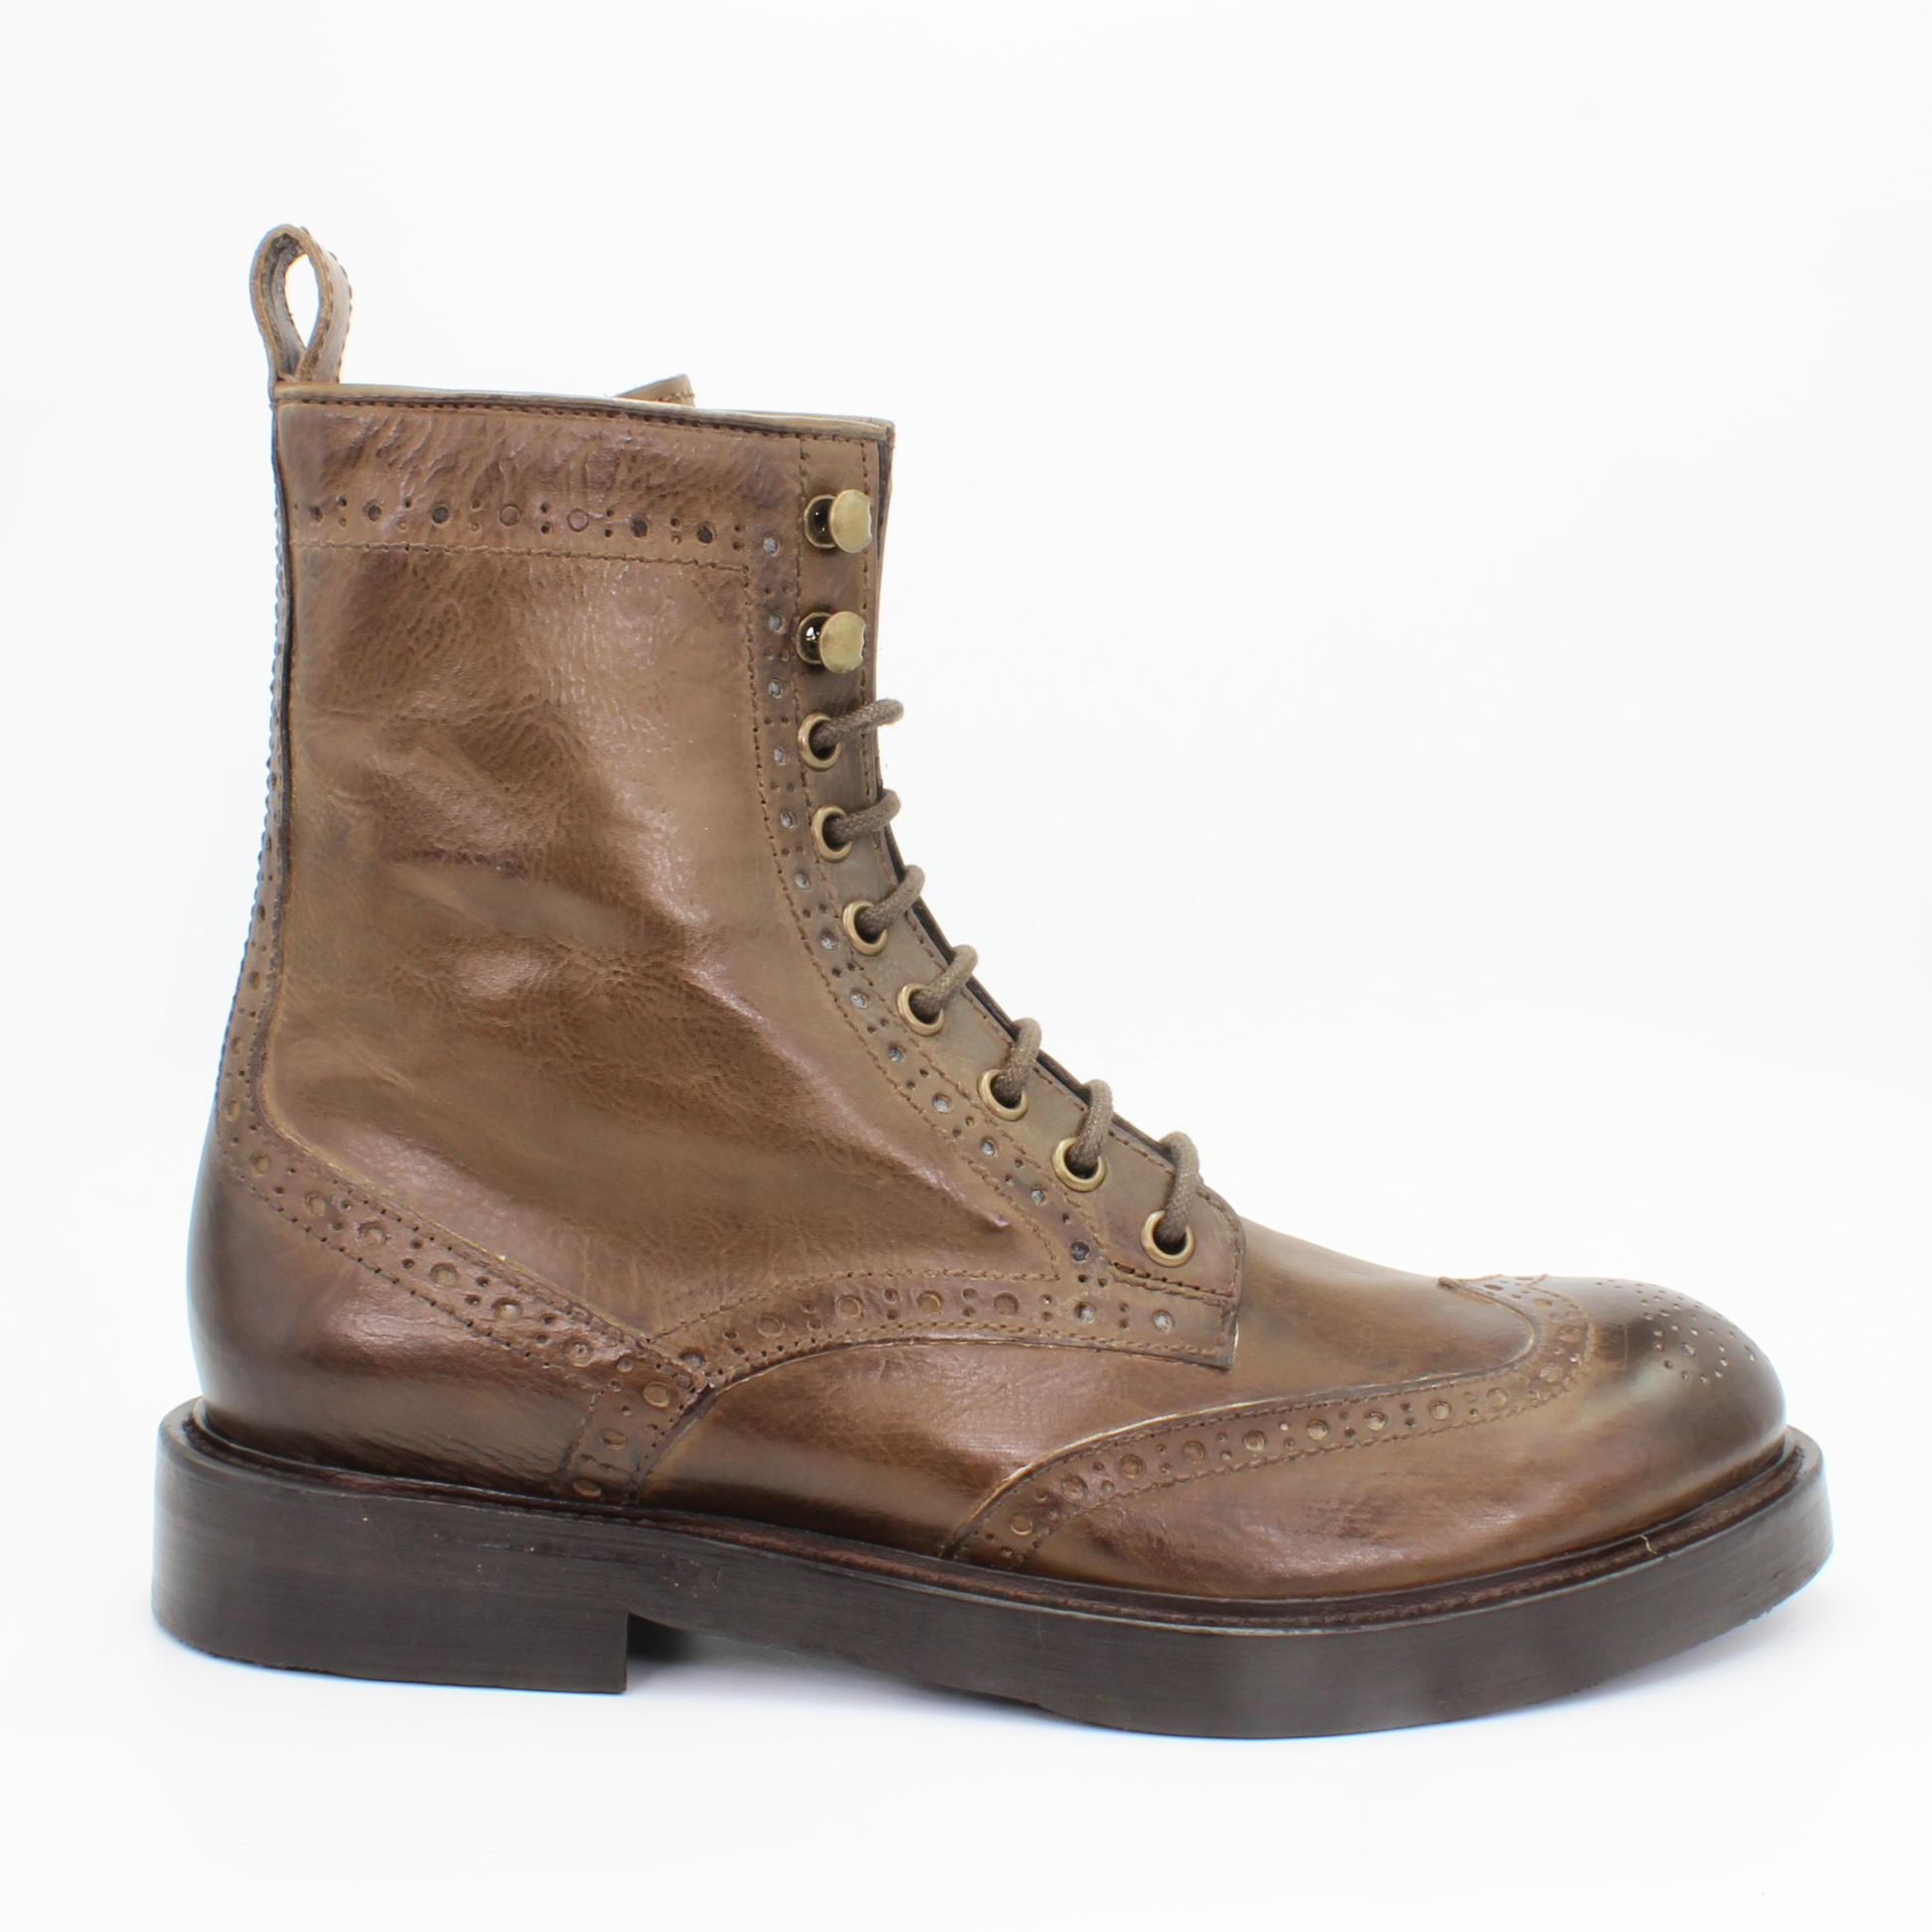 Shop Handmade Italian Leather Lace-up Ankle Boot (35773/39) or browse our range of hand-made Italian boots in leather or suede in-store at Aliverti Cape Town, or shop online. We deliver in South Africa & offer multiple payment plans as well as accept multiple safe & secure payment methods.